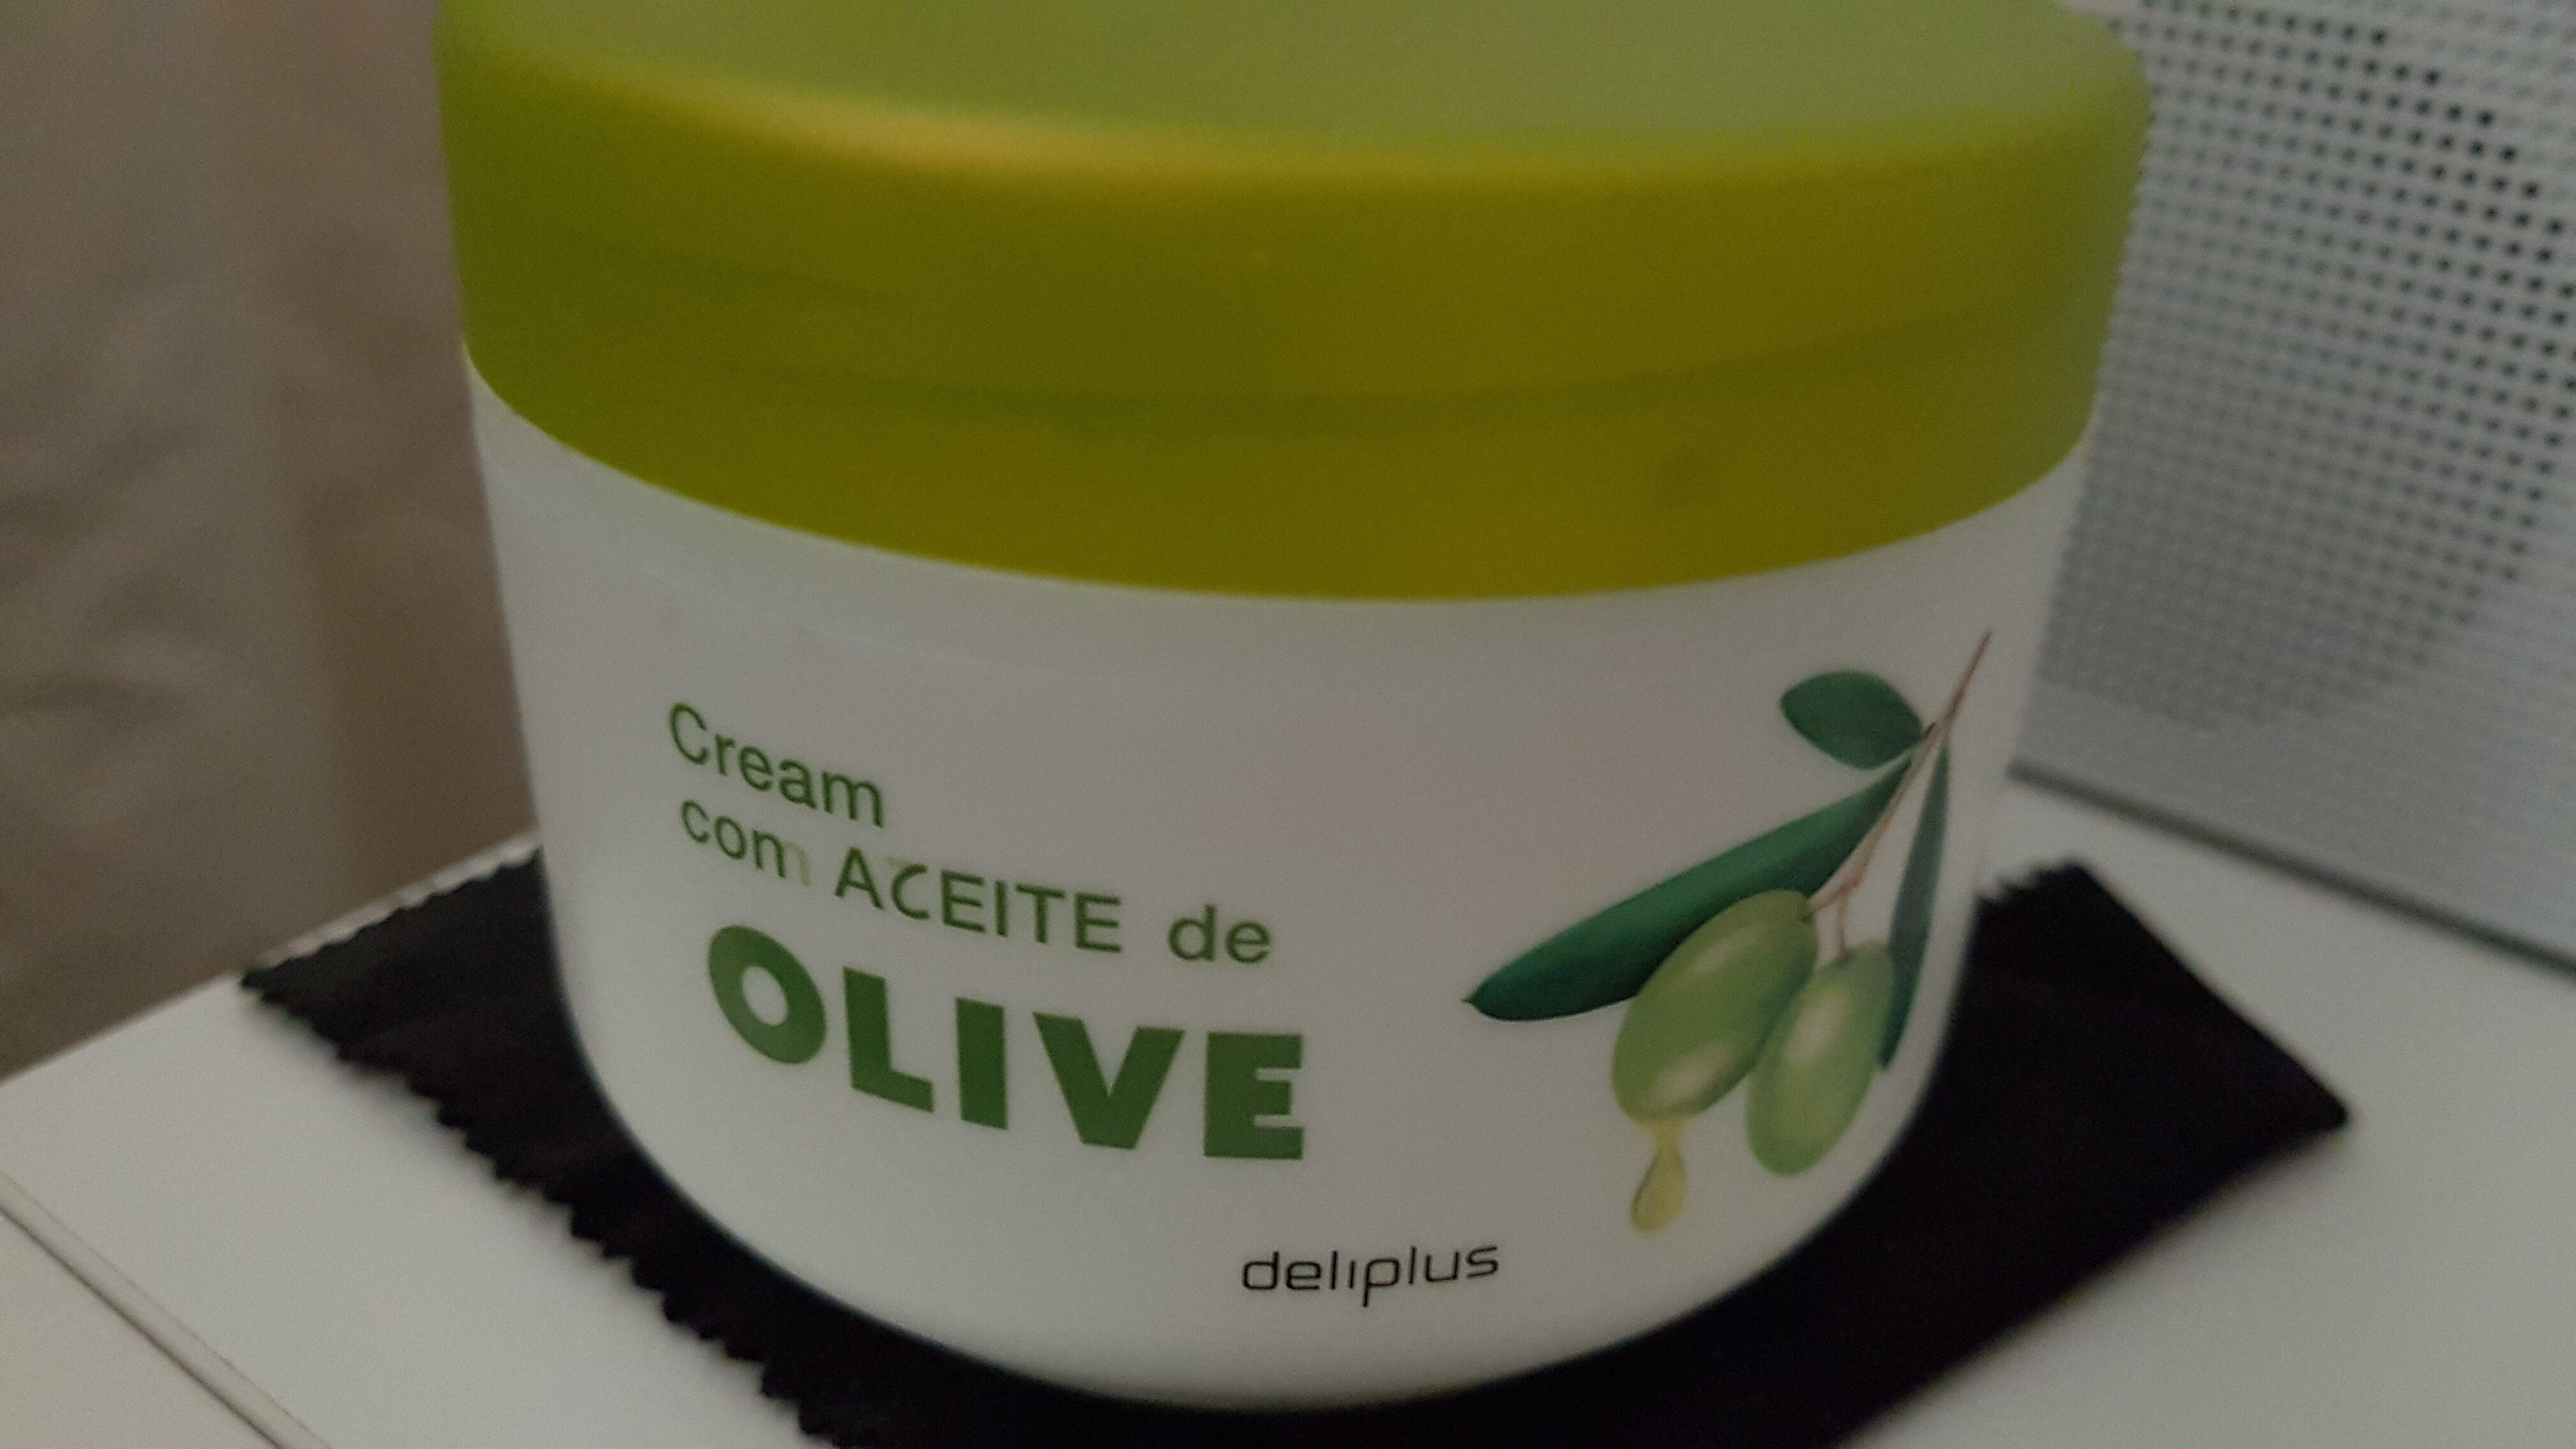 Cream with olive oil - 製品 - en